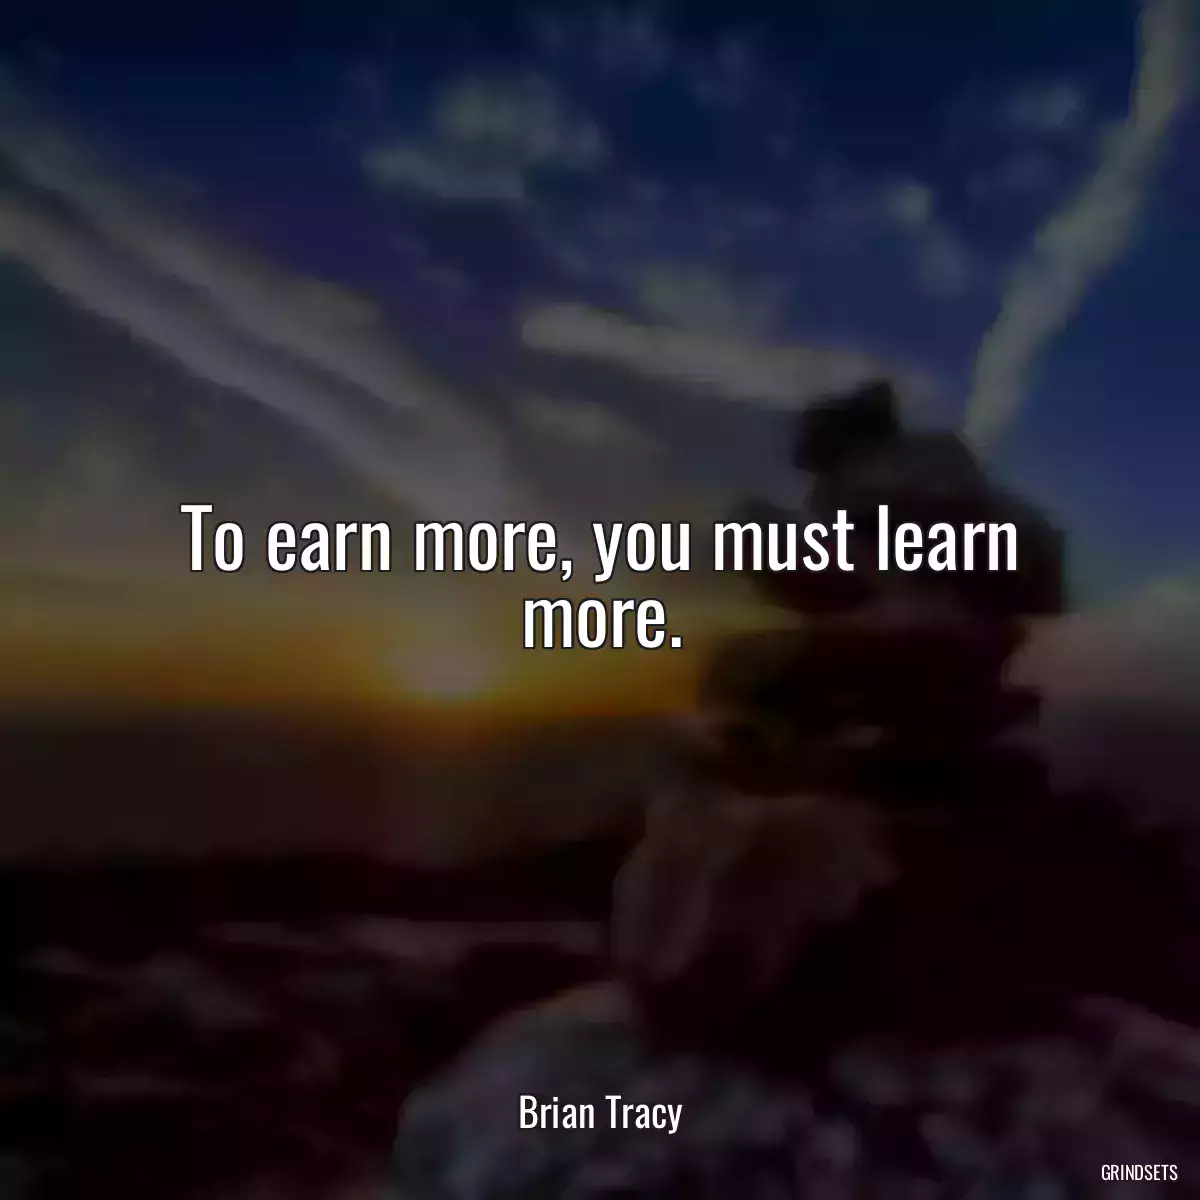 To earn more, you must learn more.